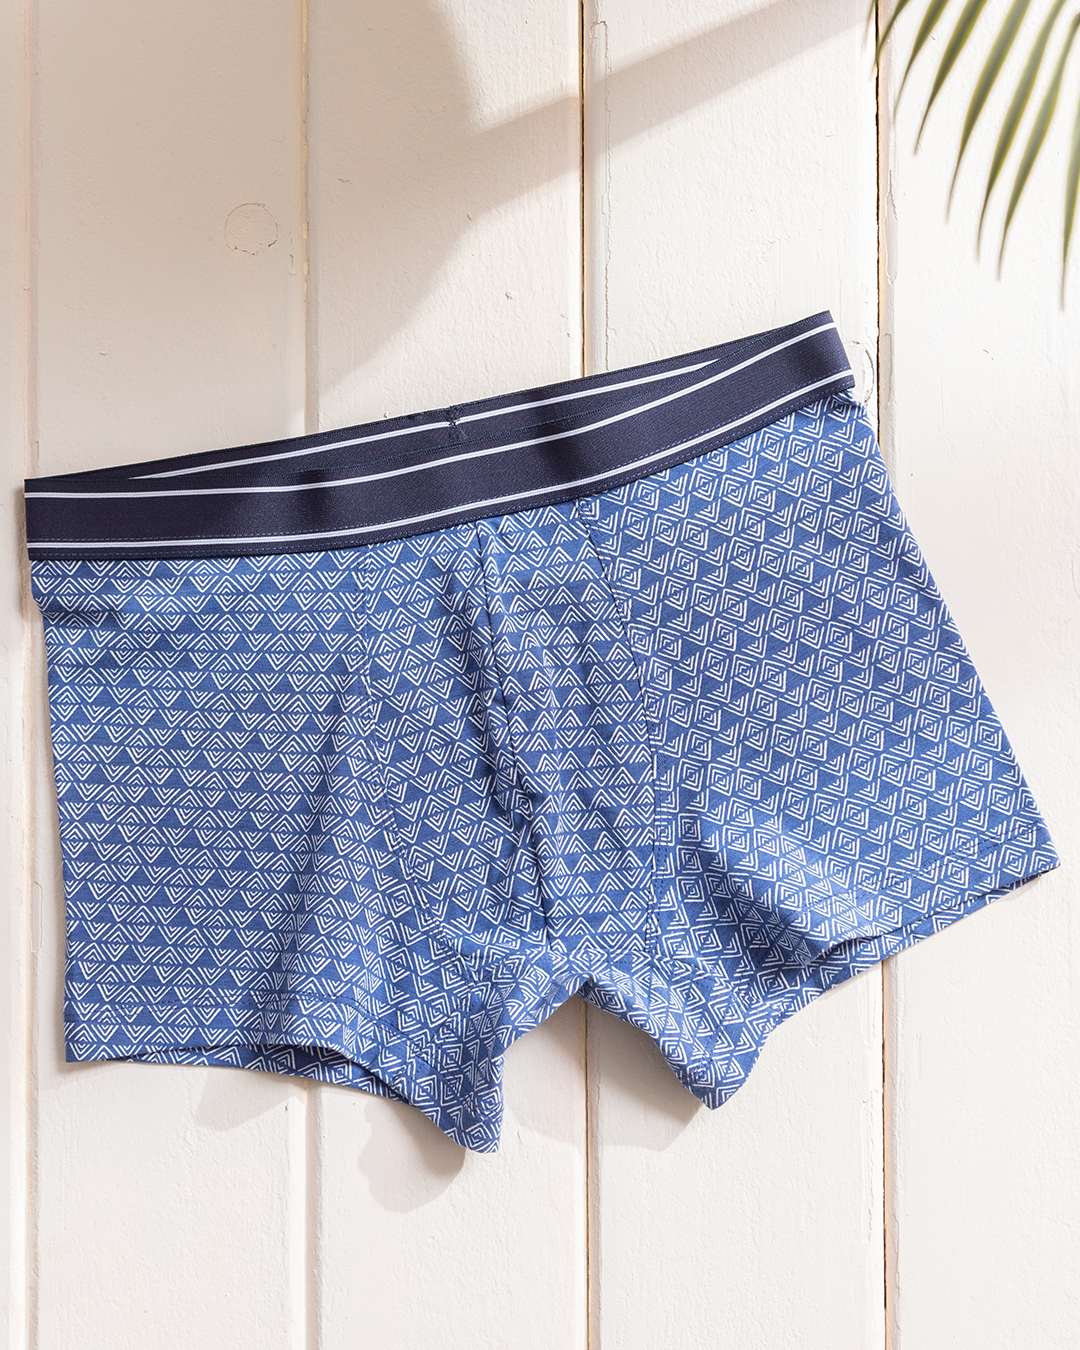 Men's boxers with triangles